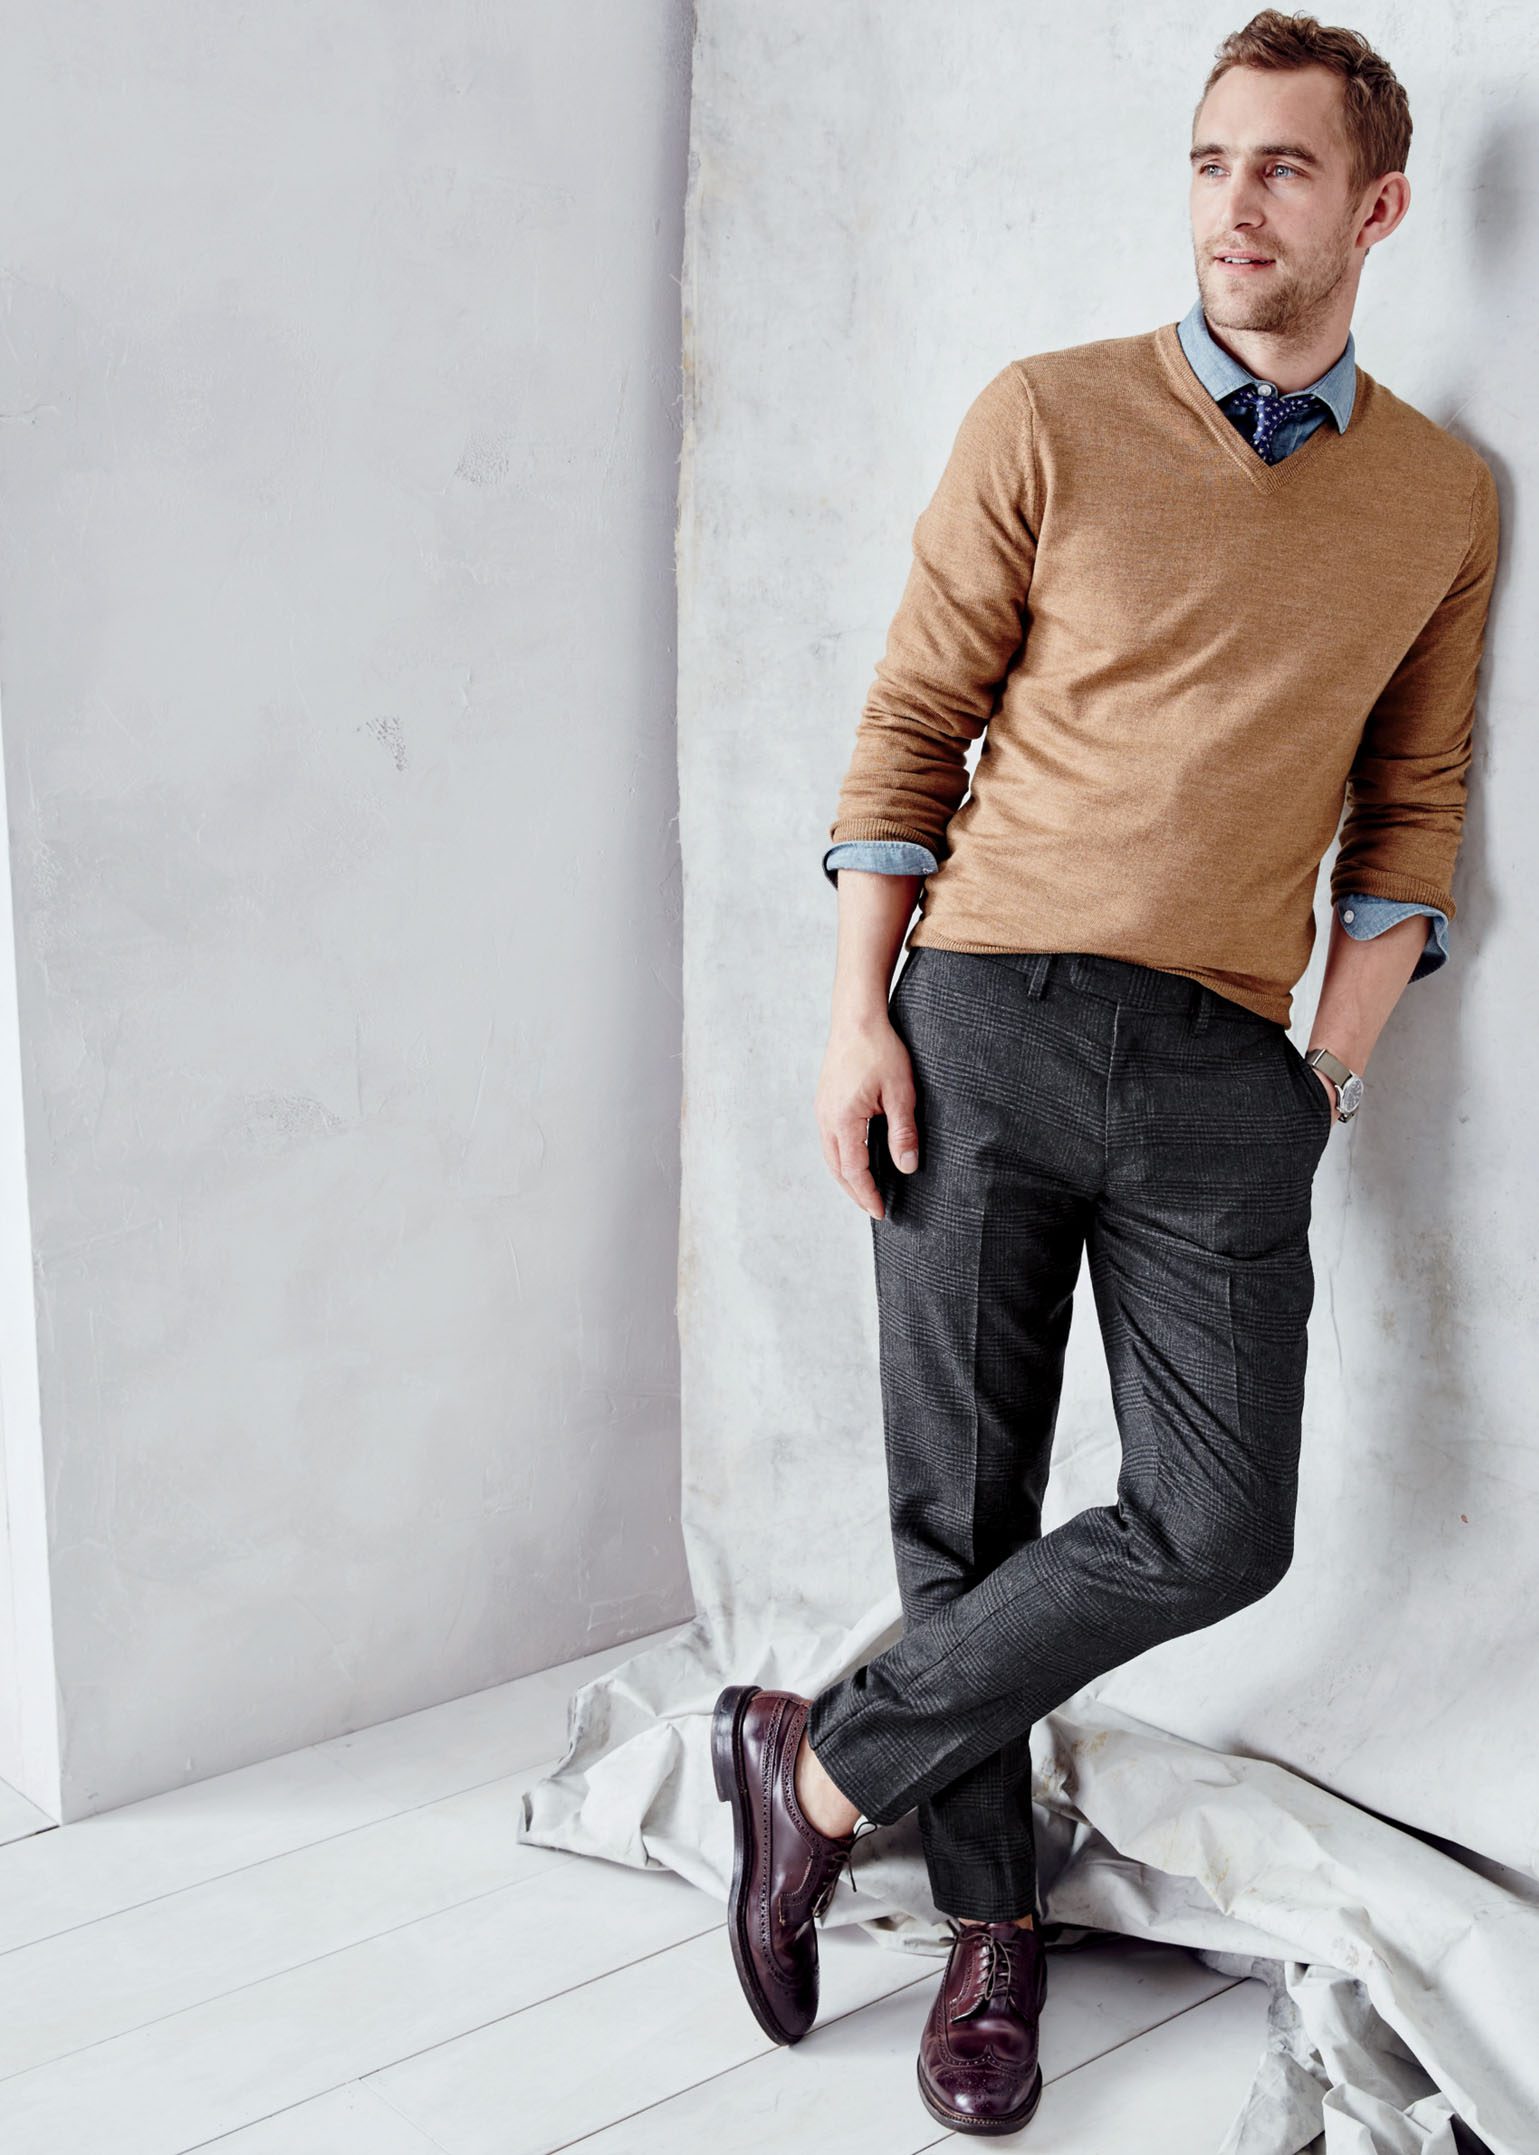 Are Tight Shirts More Attractive?  Tight Shirts For Guys – Tapered Menswear